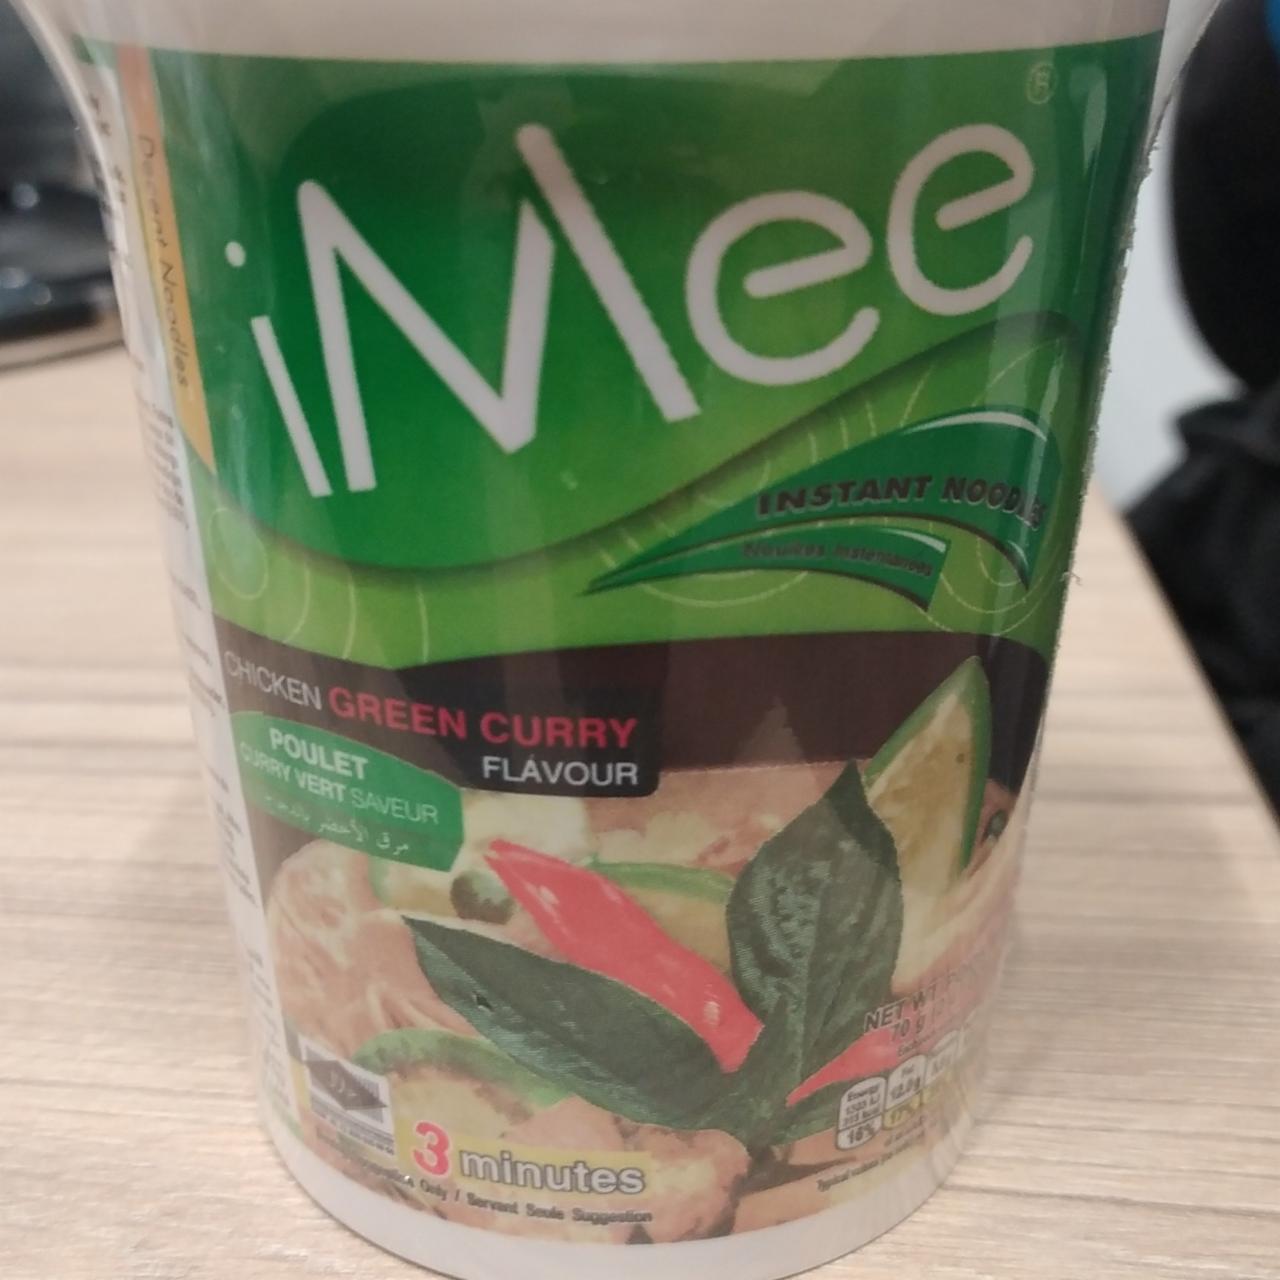 Fotografie - Instant Noodles Chicken Green Curry Flavour iMee